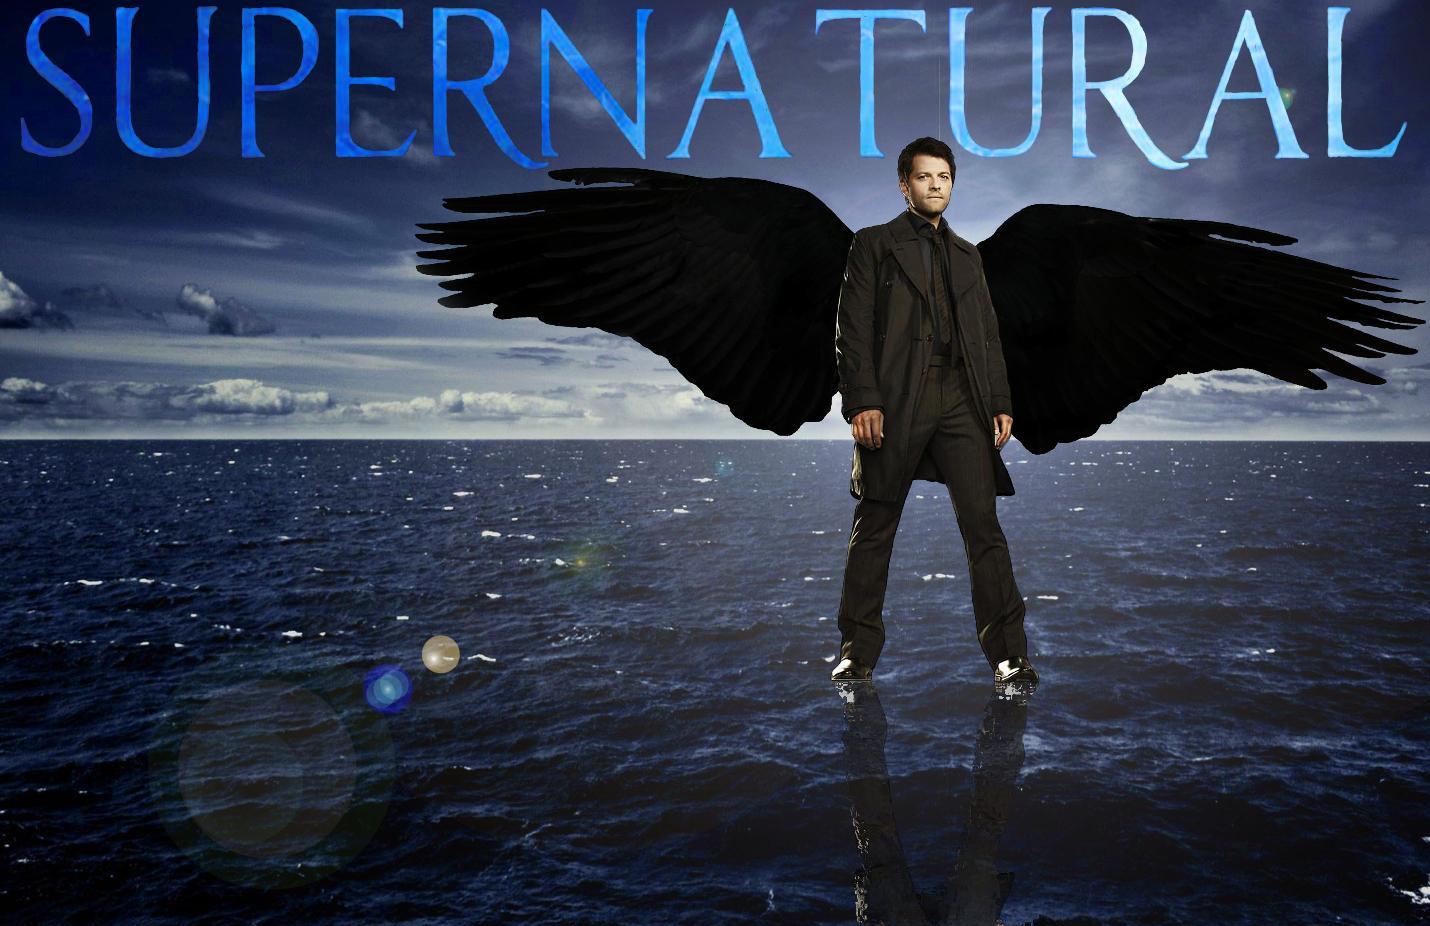 Supernatural Poster Gallery9 | Tv Series Posters and Cast